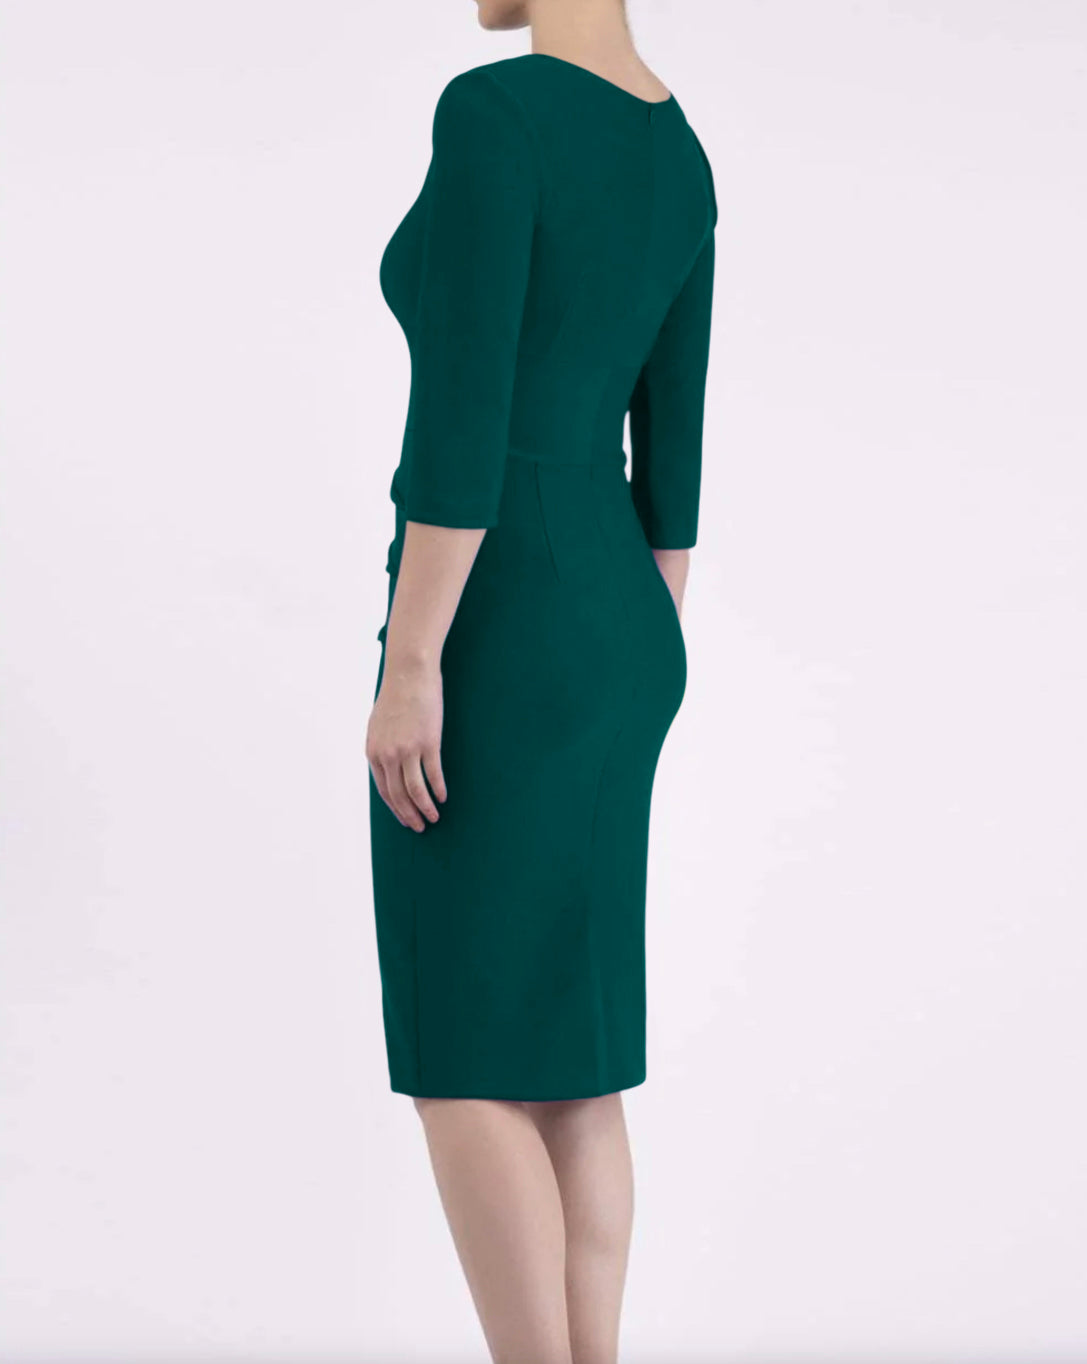 Women' Business Daphne 3/4 Sleeve Dress - Forest Green NORA GARDNER | OFFICIAL STORE for work and office